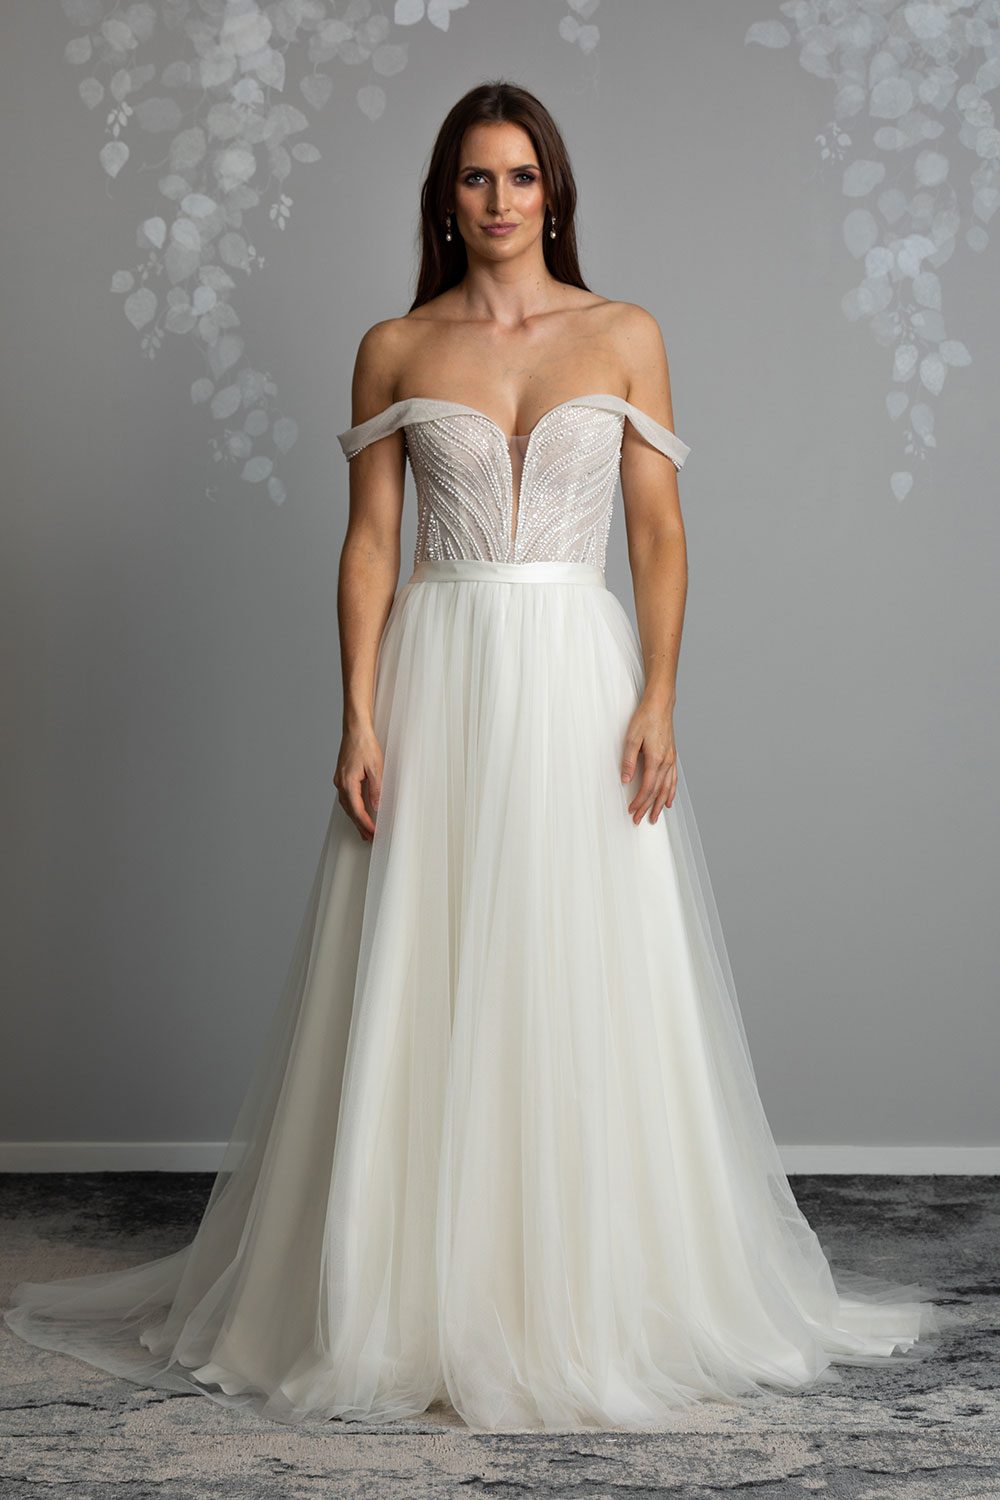 Aroha Wedding gown from Vinka Design - Beautiful & intricate pearl beading is hand-appliqued along this wedding gown’s structured, boned bodice. Delicate off-shoulder straps are complemented by the sweetheart neckline. - front view of model showcasing the fitted bodice against the soft tulle skirt